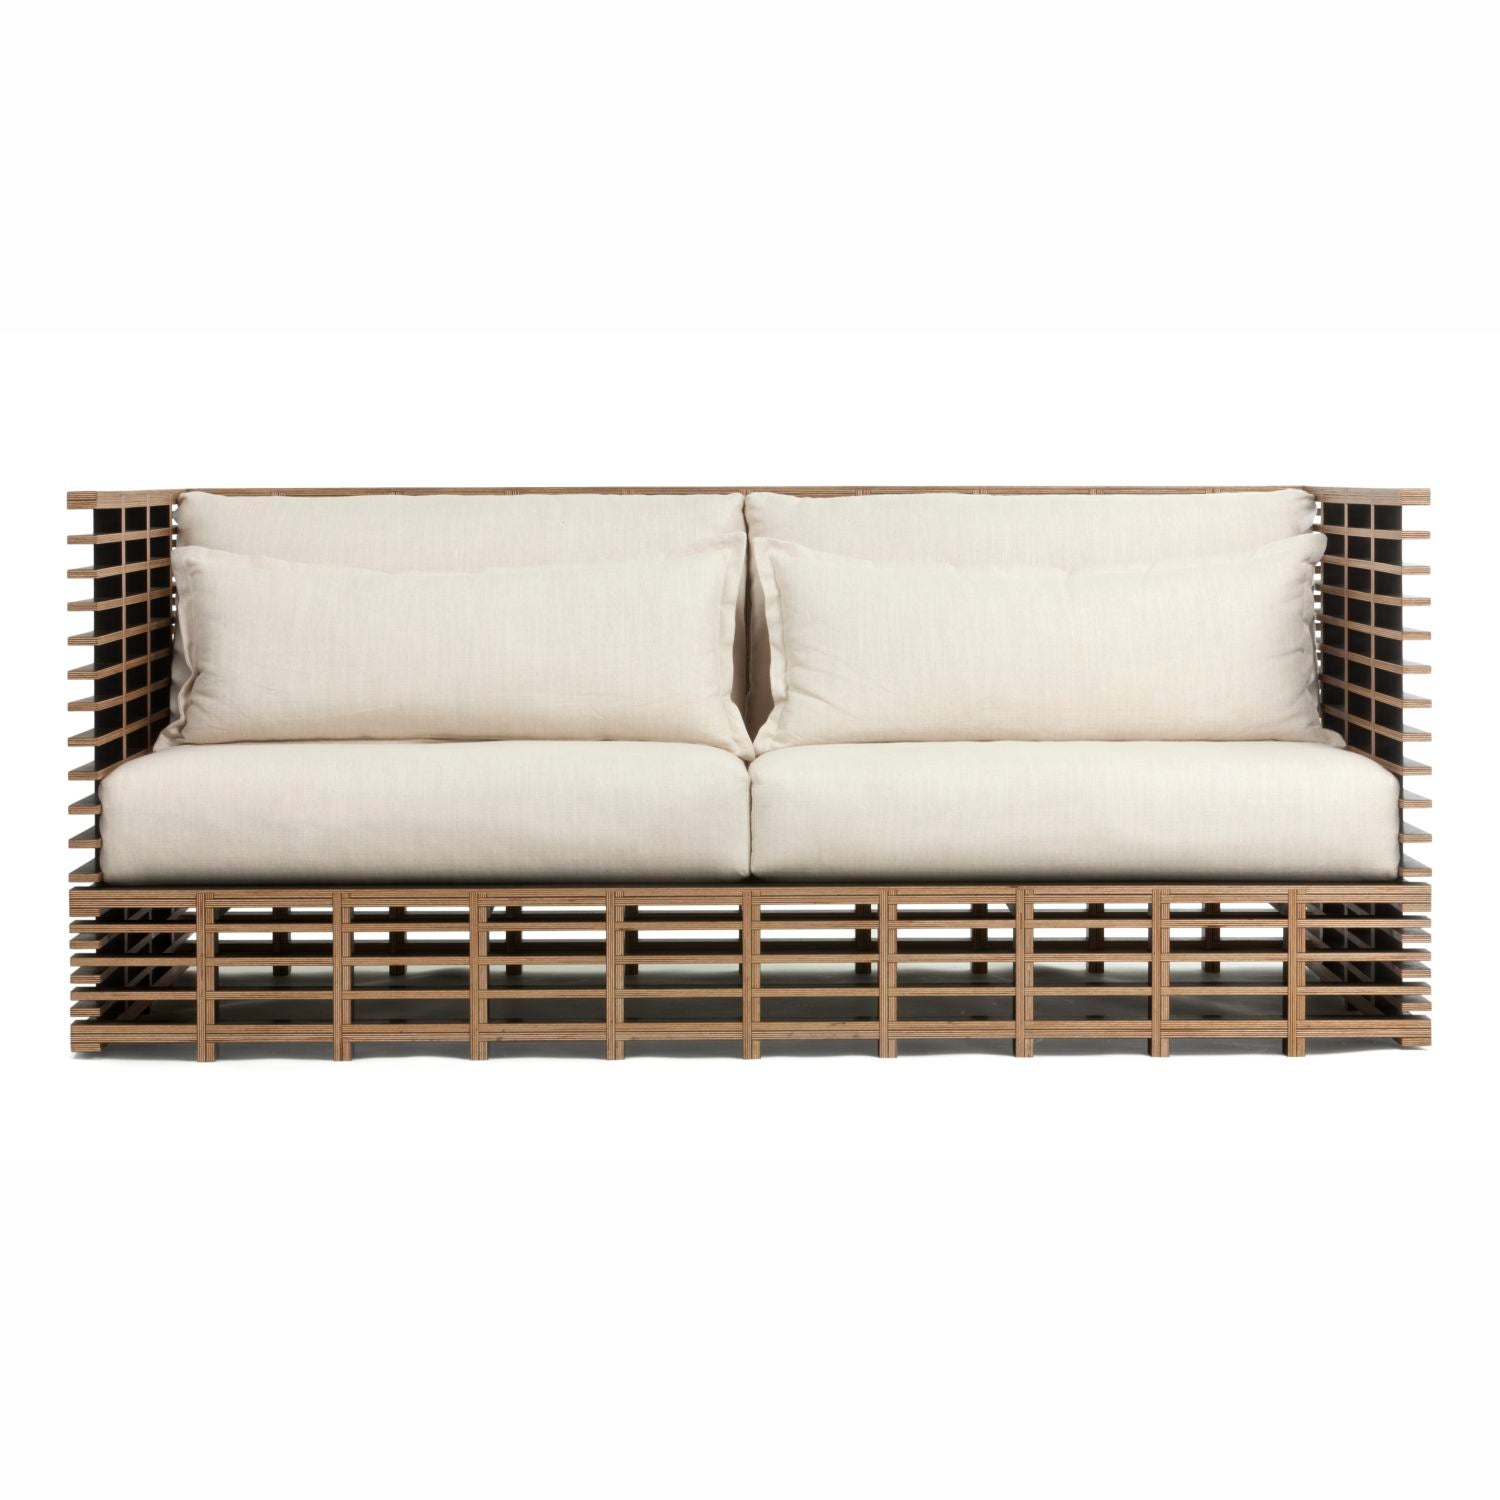 R | Unique Loveseat with Cushions